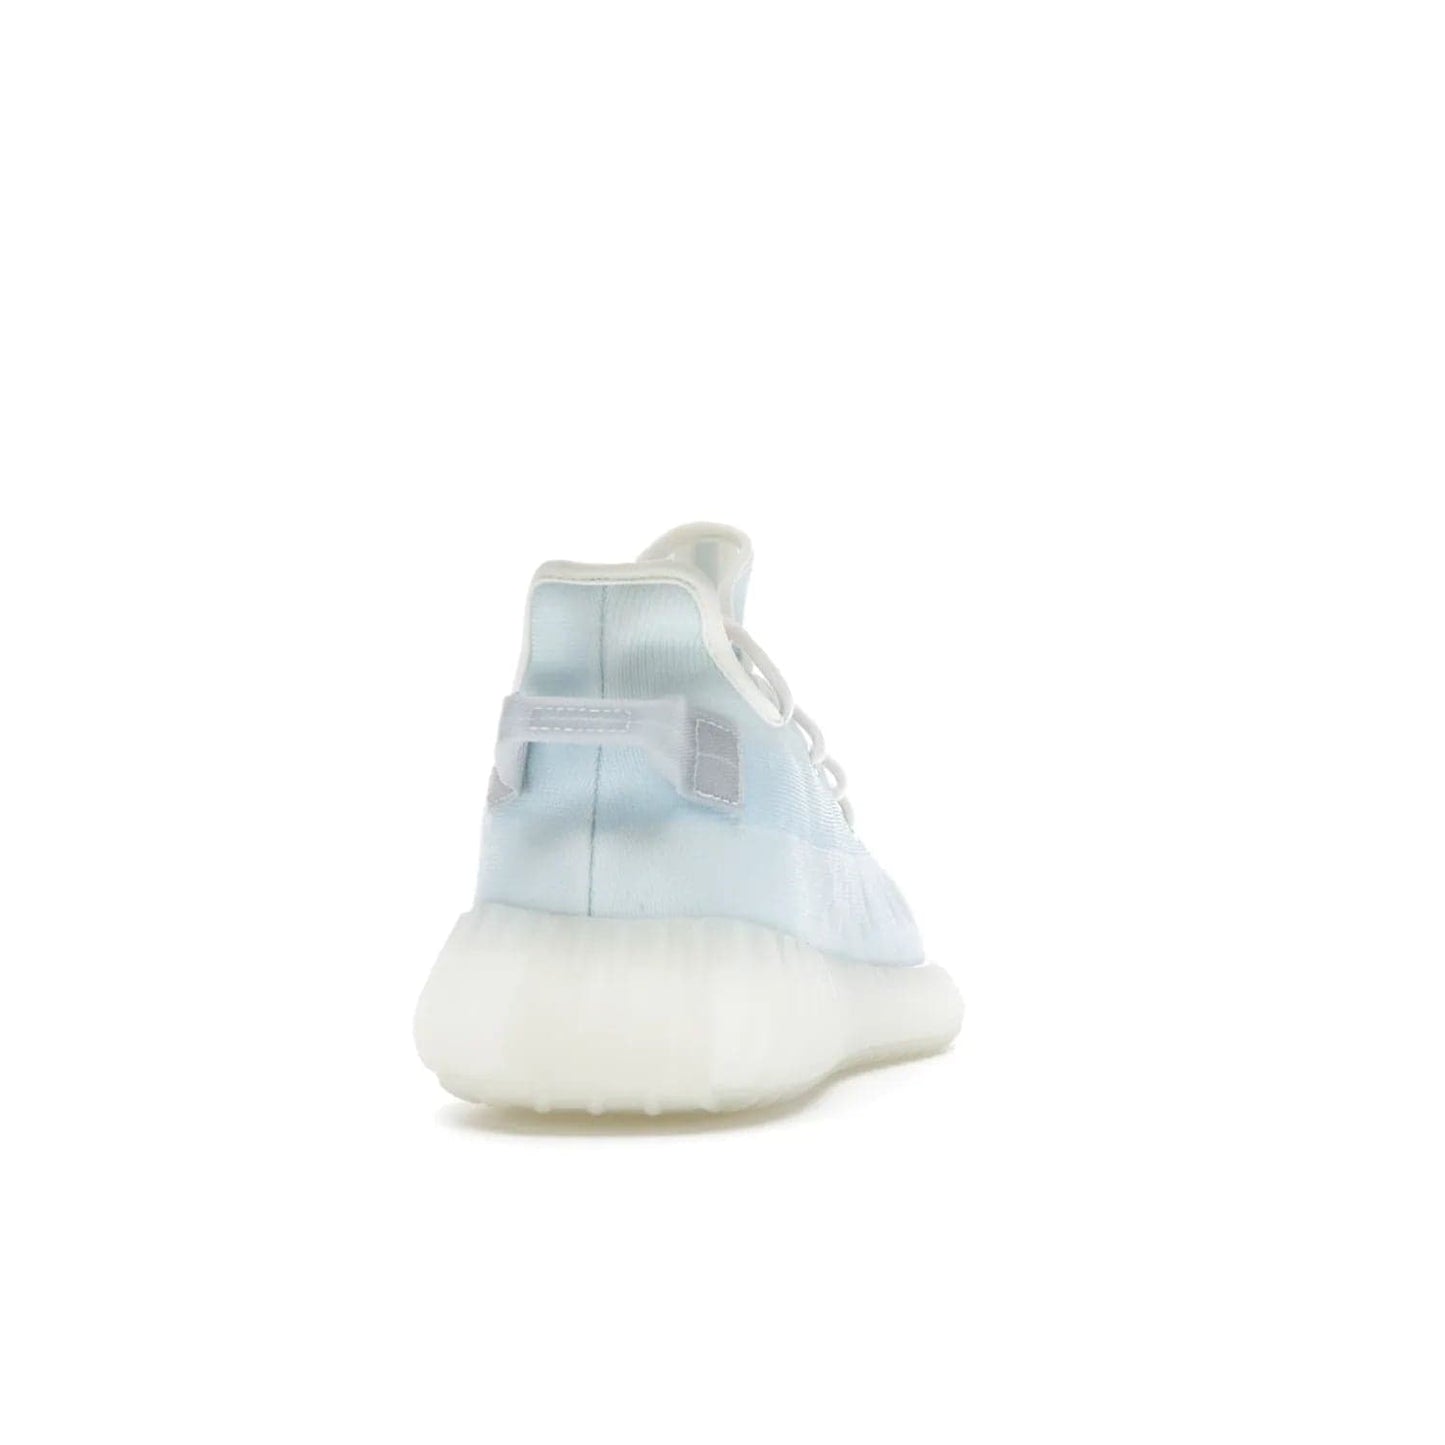 adidas Yeezy Boost 350 V2 Mono Ice - Image 29 - Only at www.BallersClubKickz.com - Introducing the adidas Yeezy 350 V2 Mono Ice - a sleek monofilament mesh design in Ice blue with Boost sole and heel pull tab. Released exclusively in the US for $220.